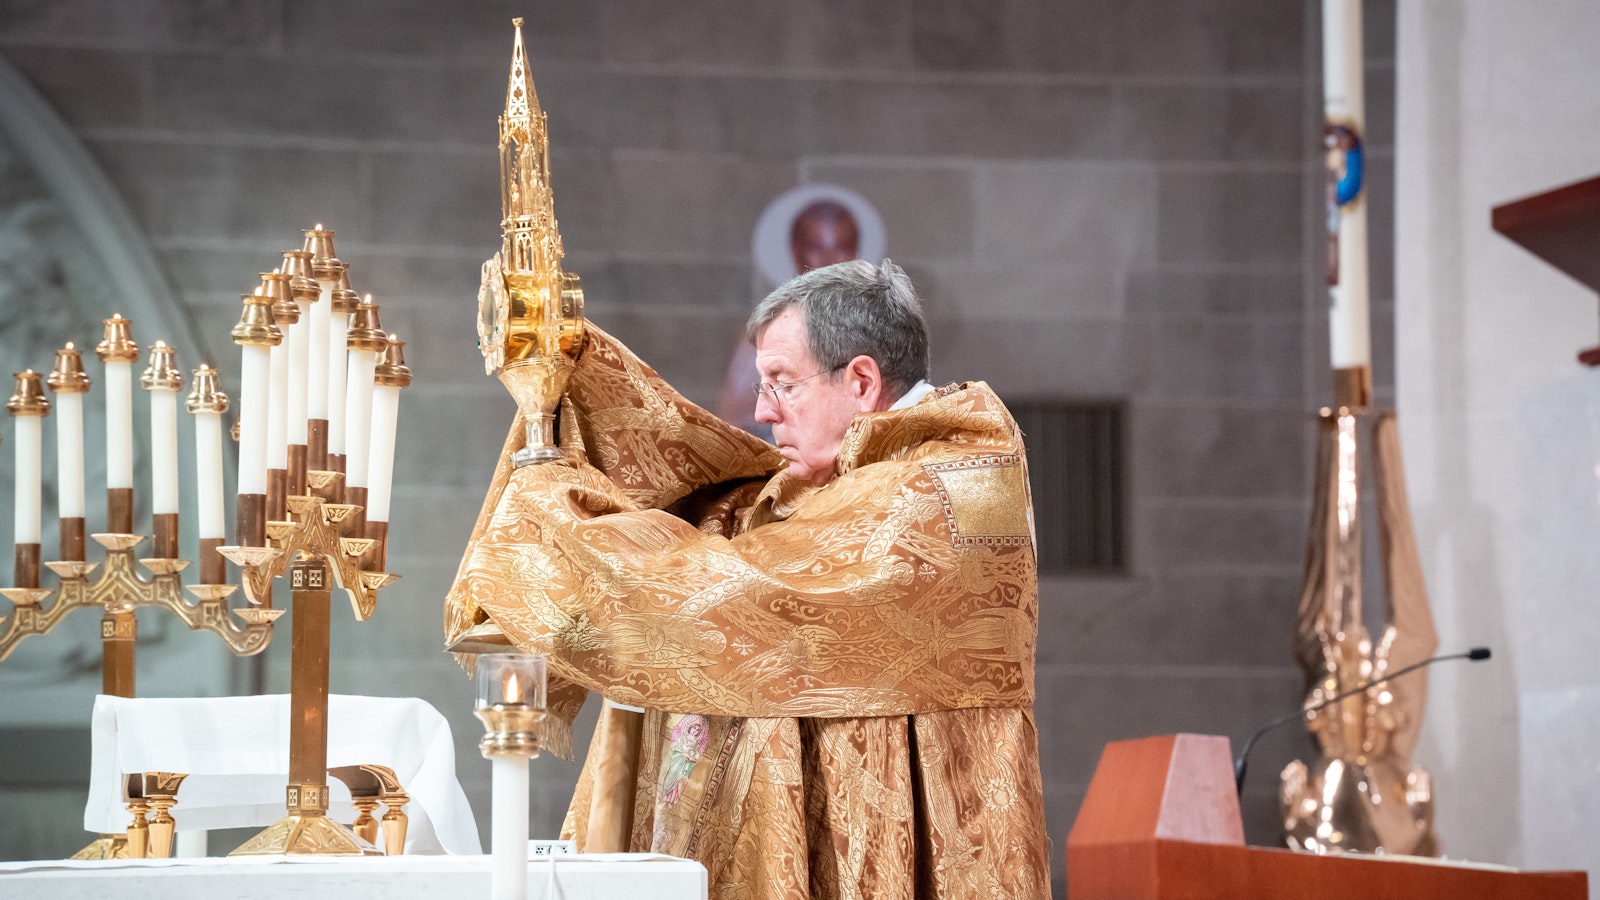 Archbishop Vigneron elevates the monstrance with the Holy Eucharist during a holy hour at the Cathedral of the Most Blessed Sacrament to close a Year of Prayer for Priestly Vocations in the Archdiocese of Detroit on June 4, 2022. (Valaurian Waller | Detroit Catholic)